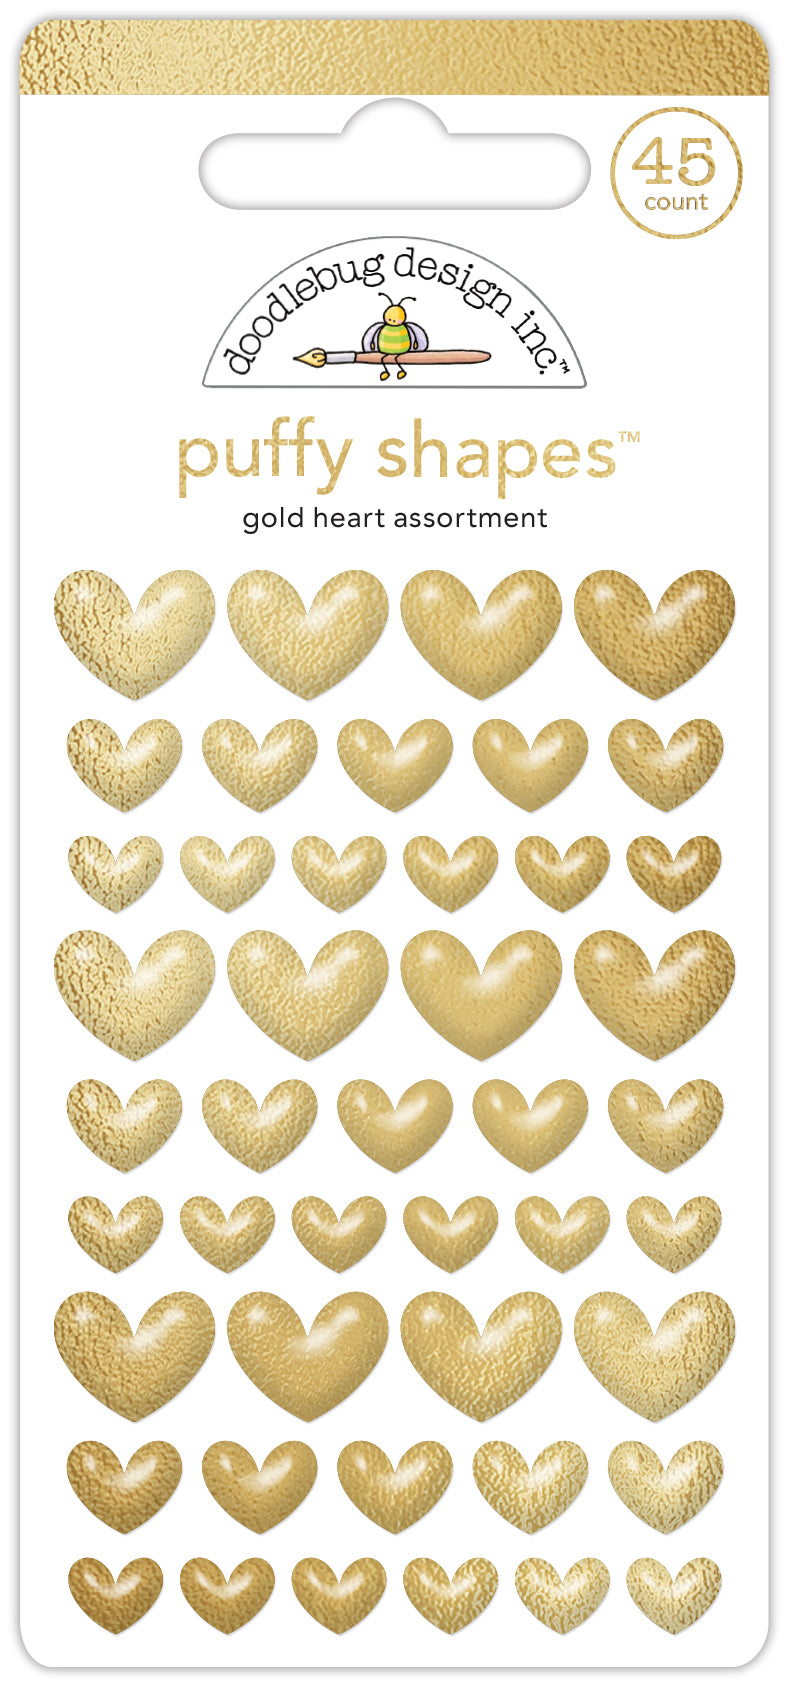 Gold Heart Puffy Shapes